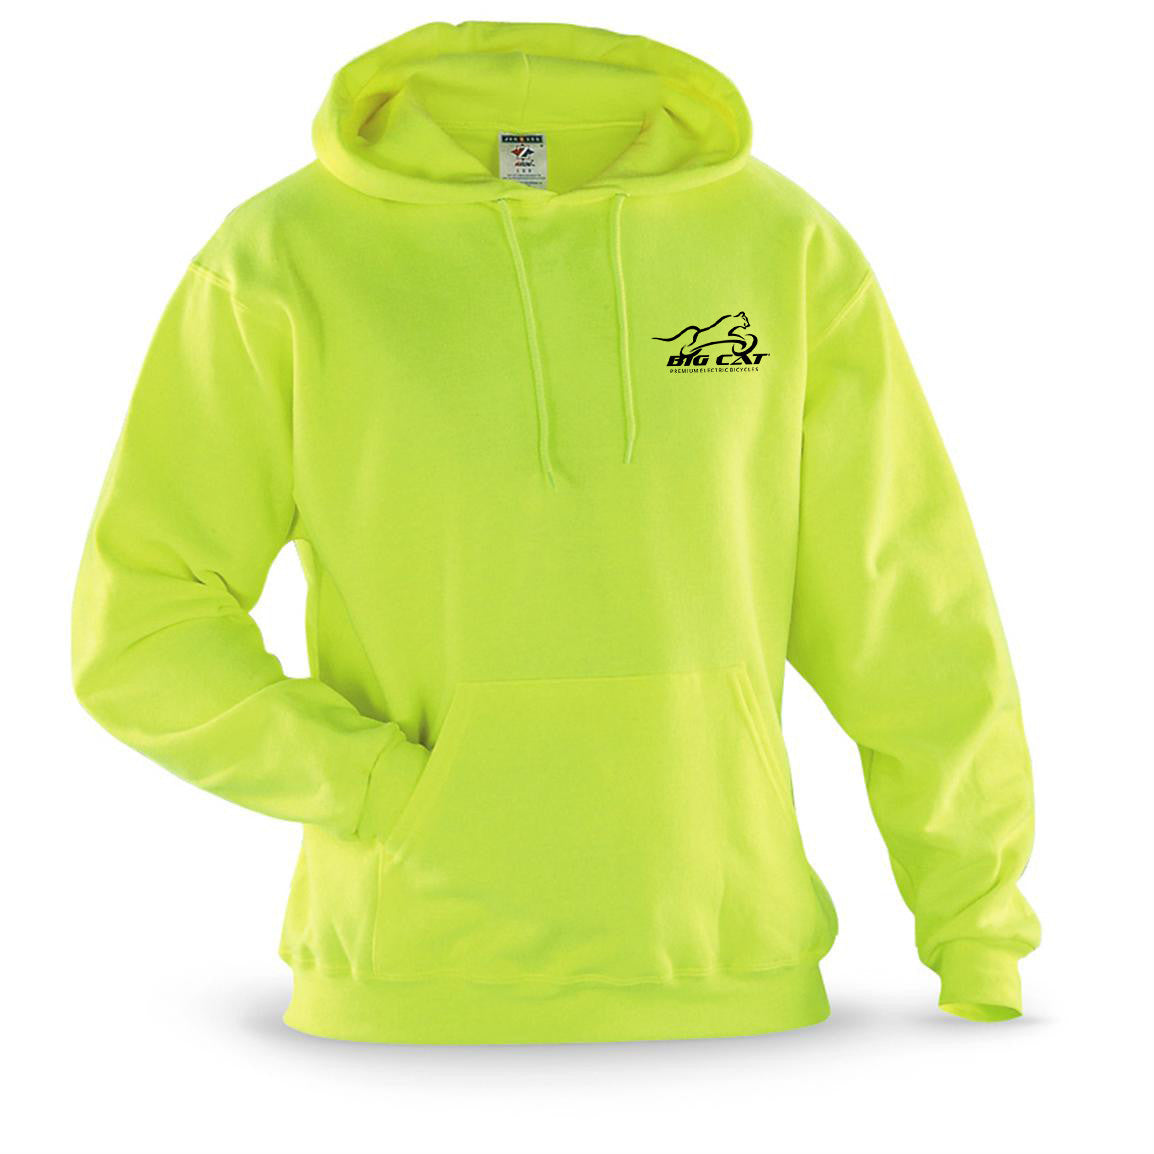 Highlighter-yellow hoodie with Big Cat logo over left breast.